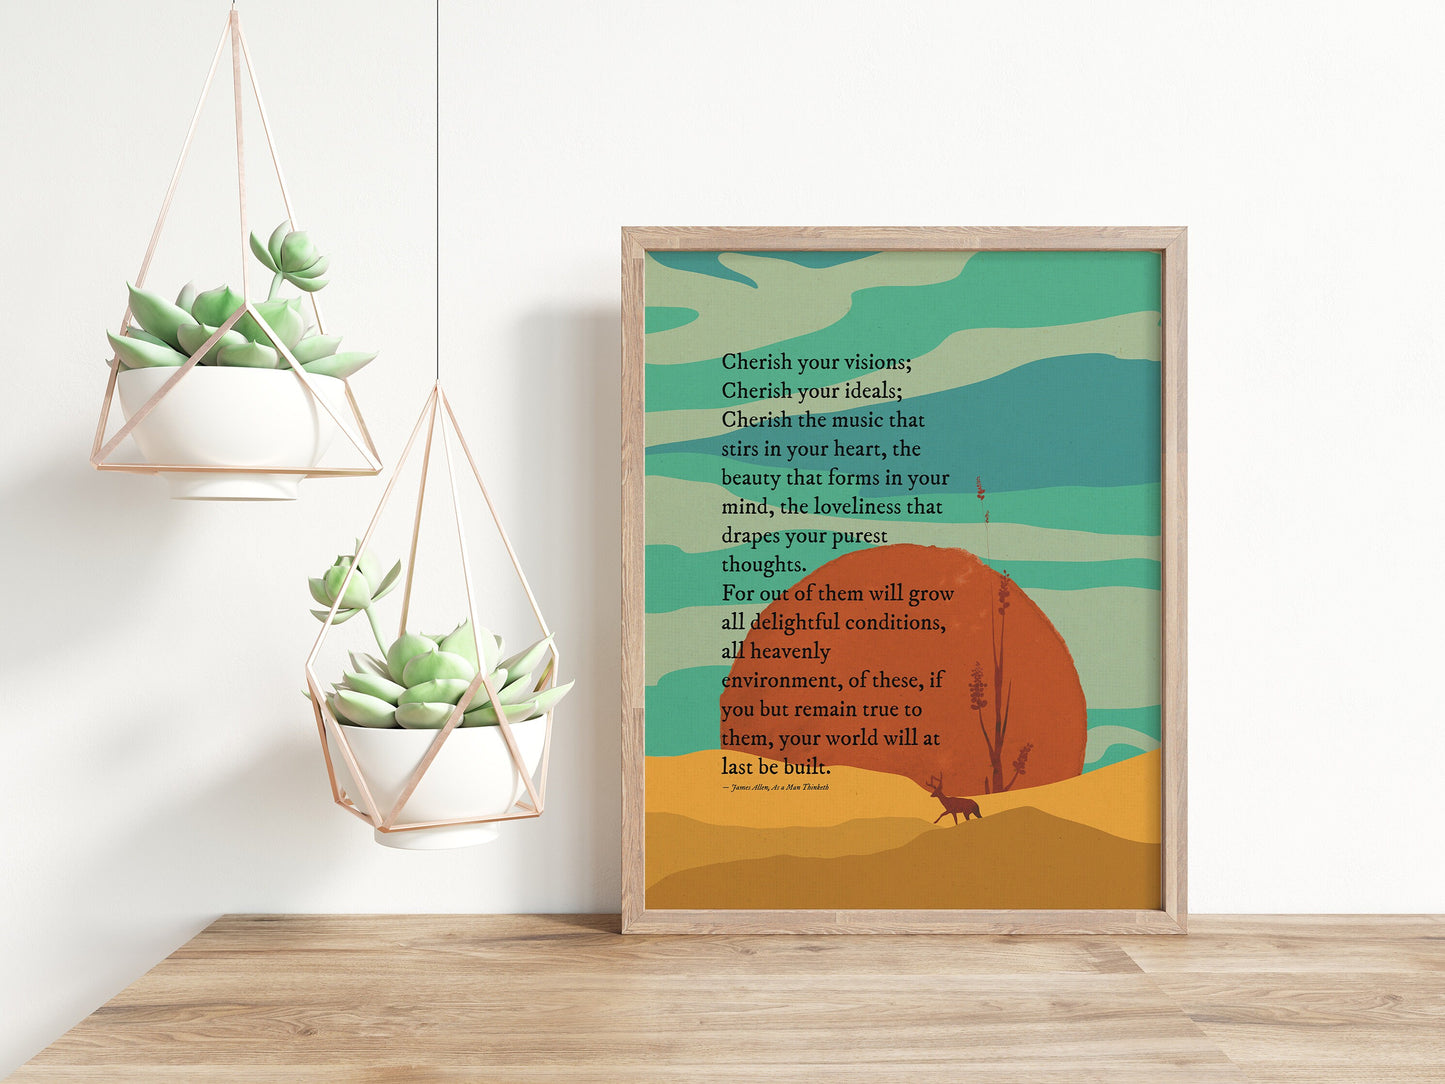 Cherish your vision by james allen from As a Man Thinketh with a colorful scenic illustration in orange, blue, yellow & black in wood frame mockup